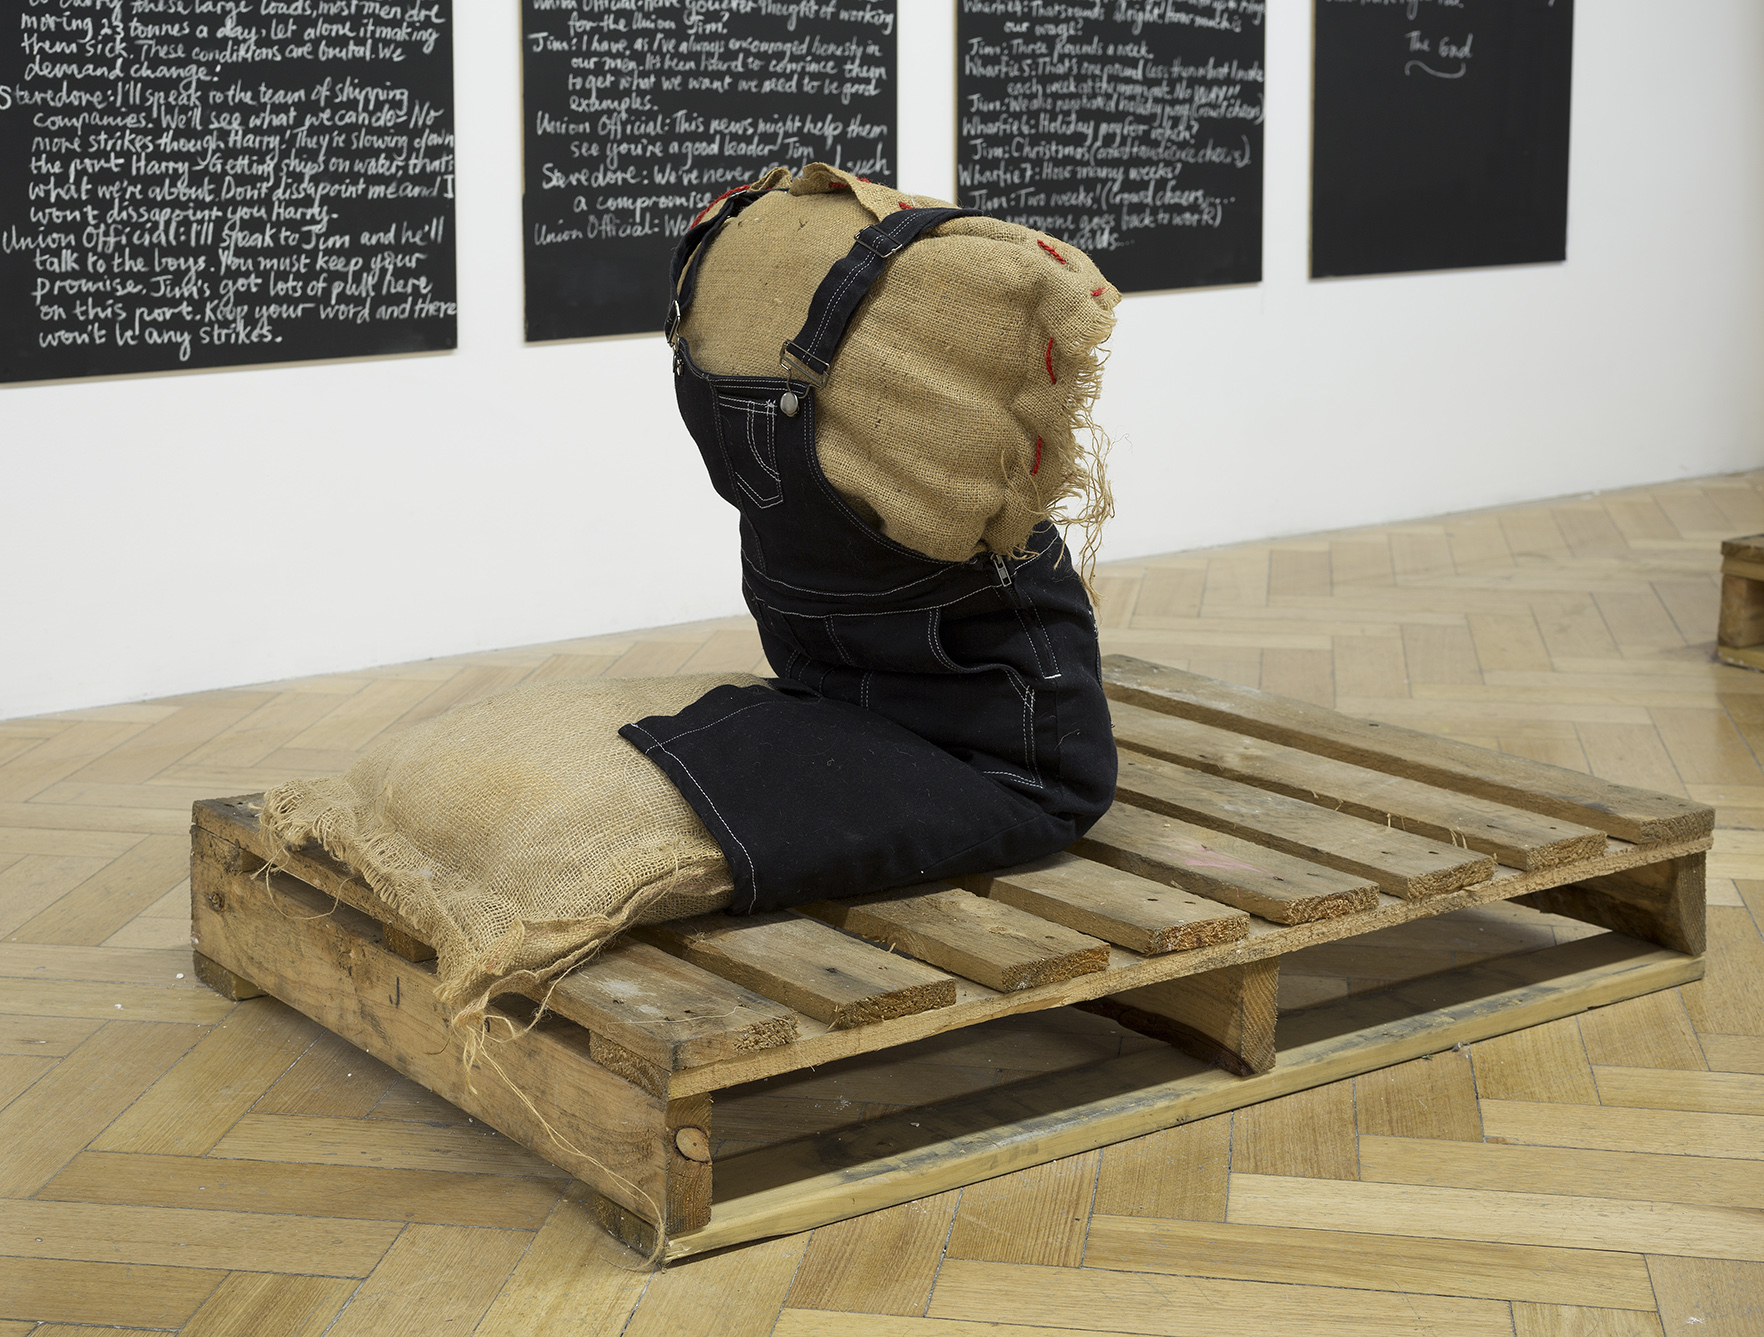   My life as a wharfie learnerar,  2017, hessian sack, and twine wadding and newspaper, purchased girl overall dress, found crate, 810 x 800 x 1010 mm. Image: Christian Capurro. 